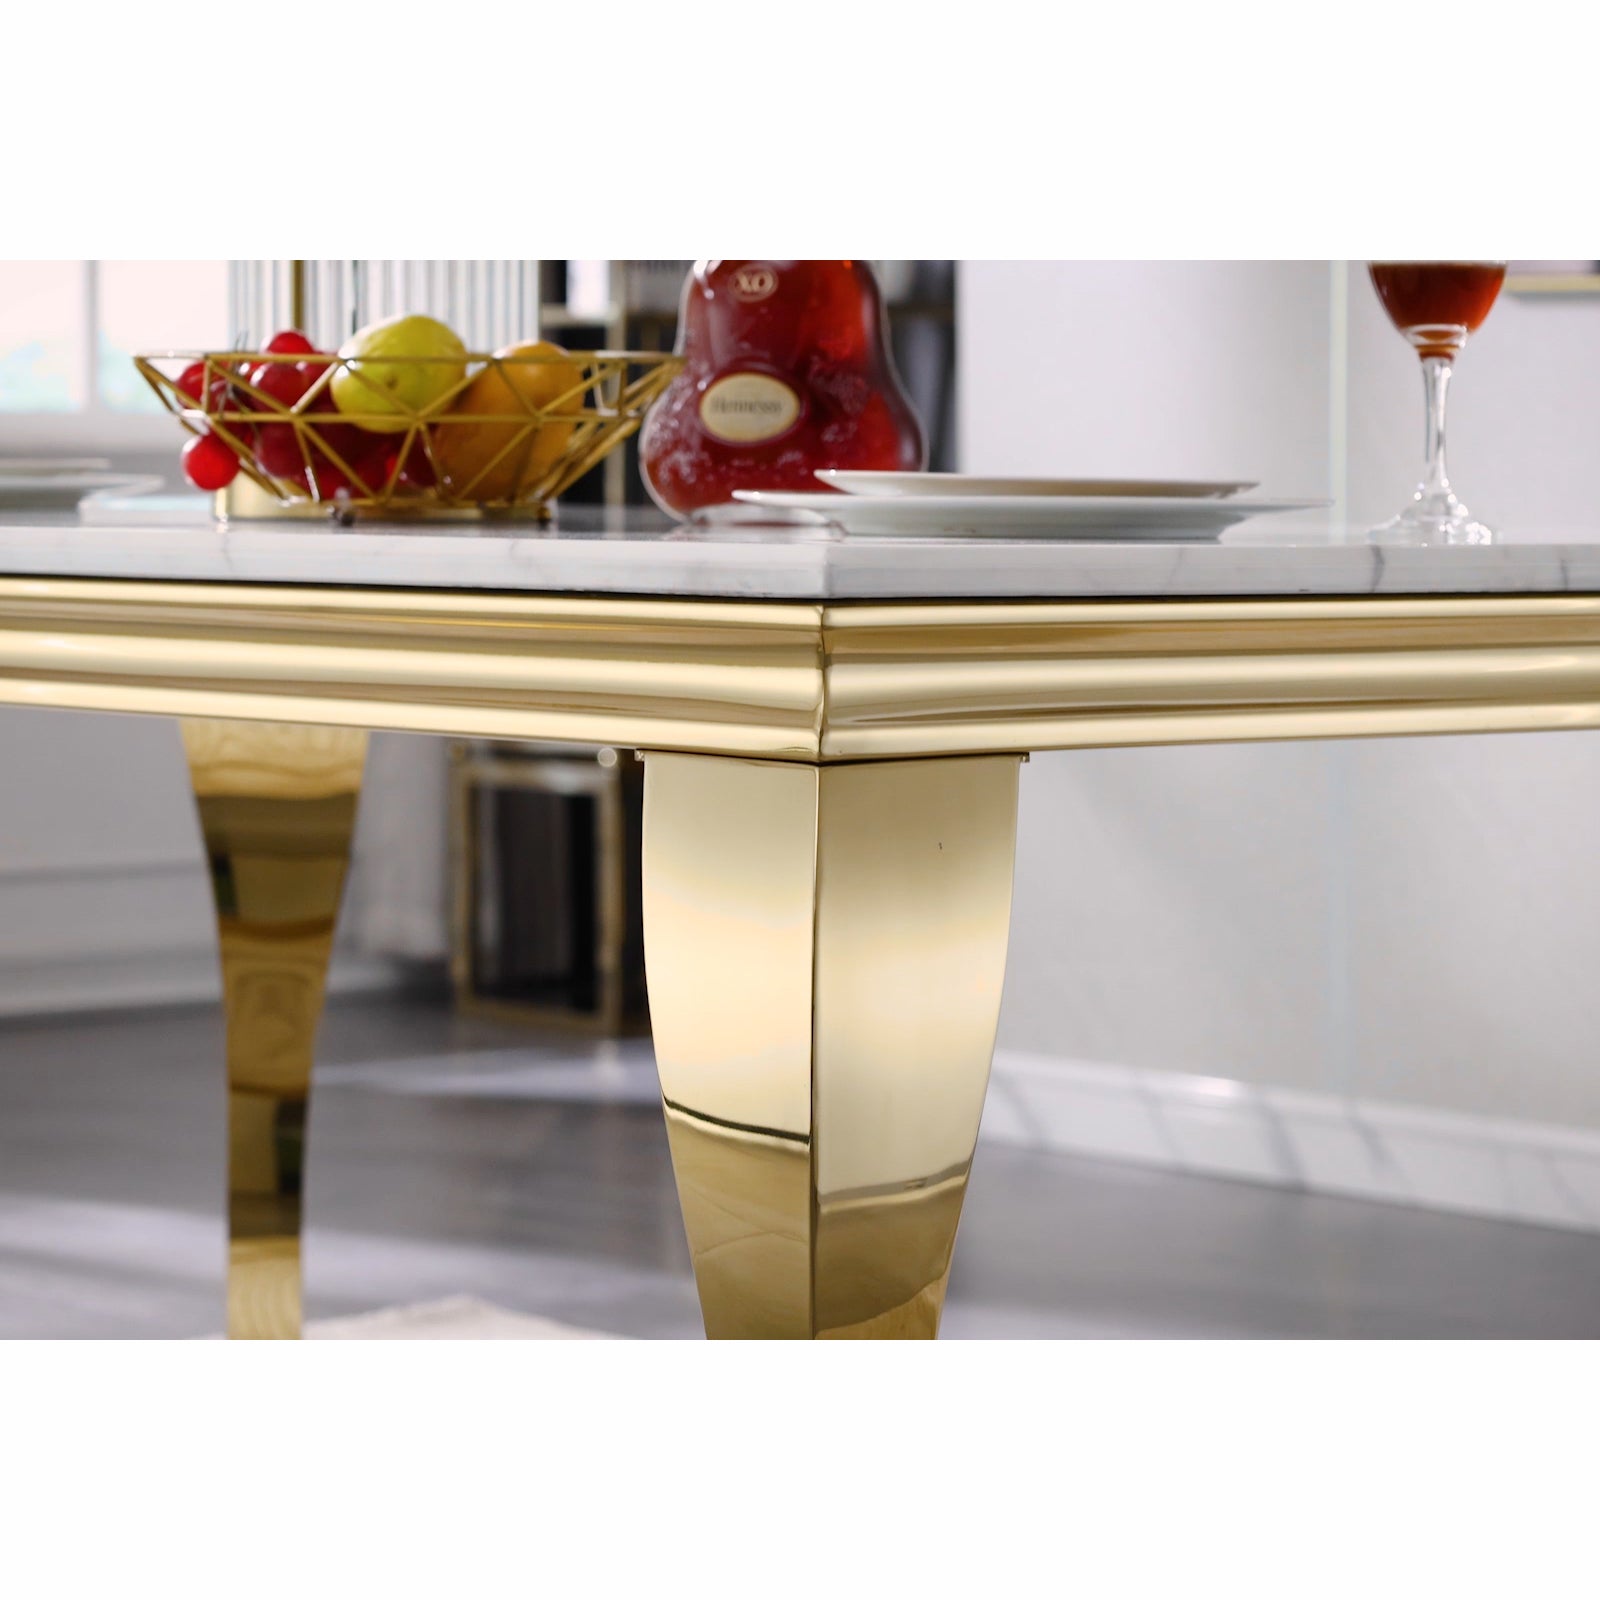 698 Set | AUZ White and gold Dining room Sets for 6